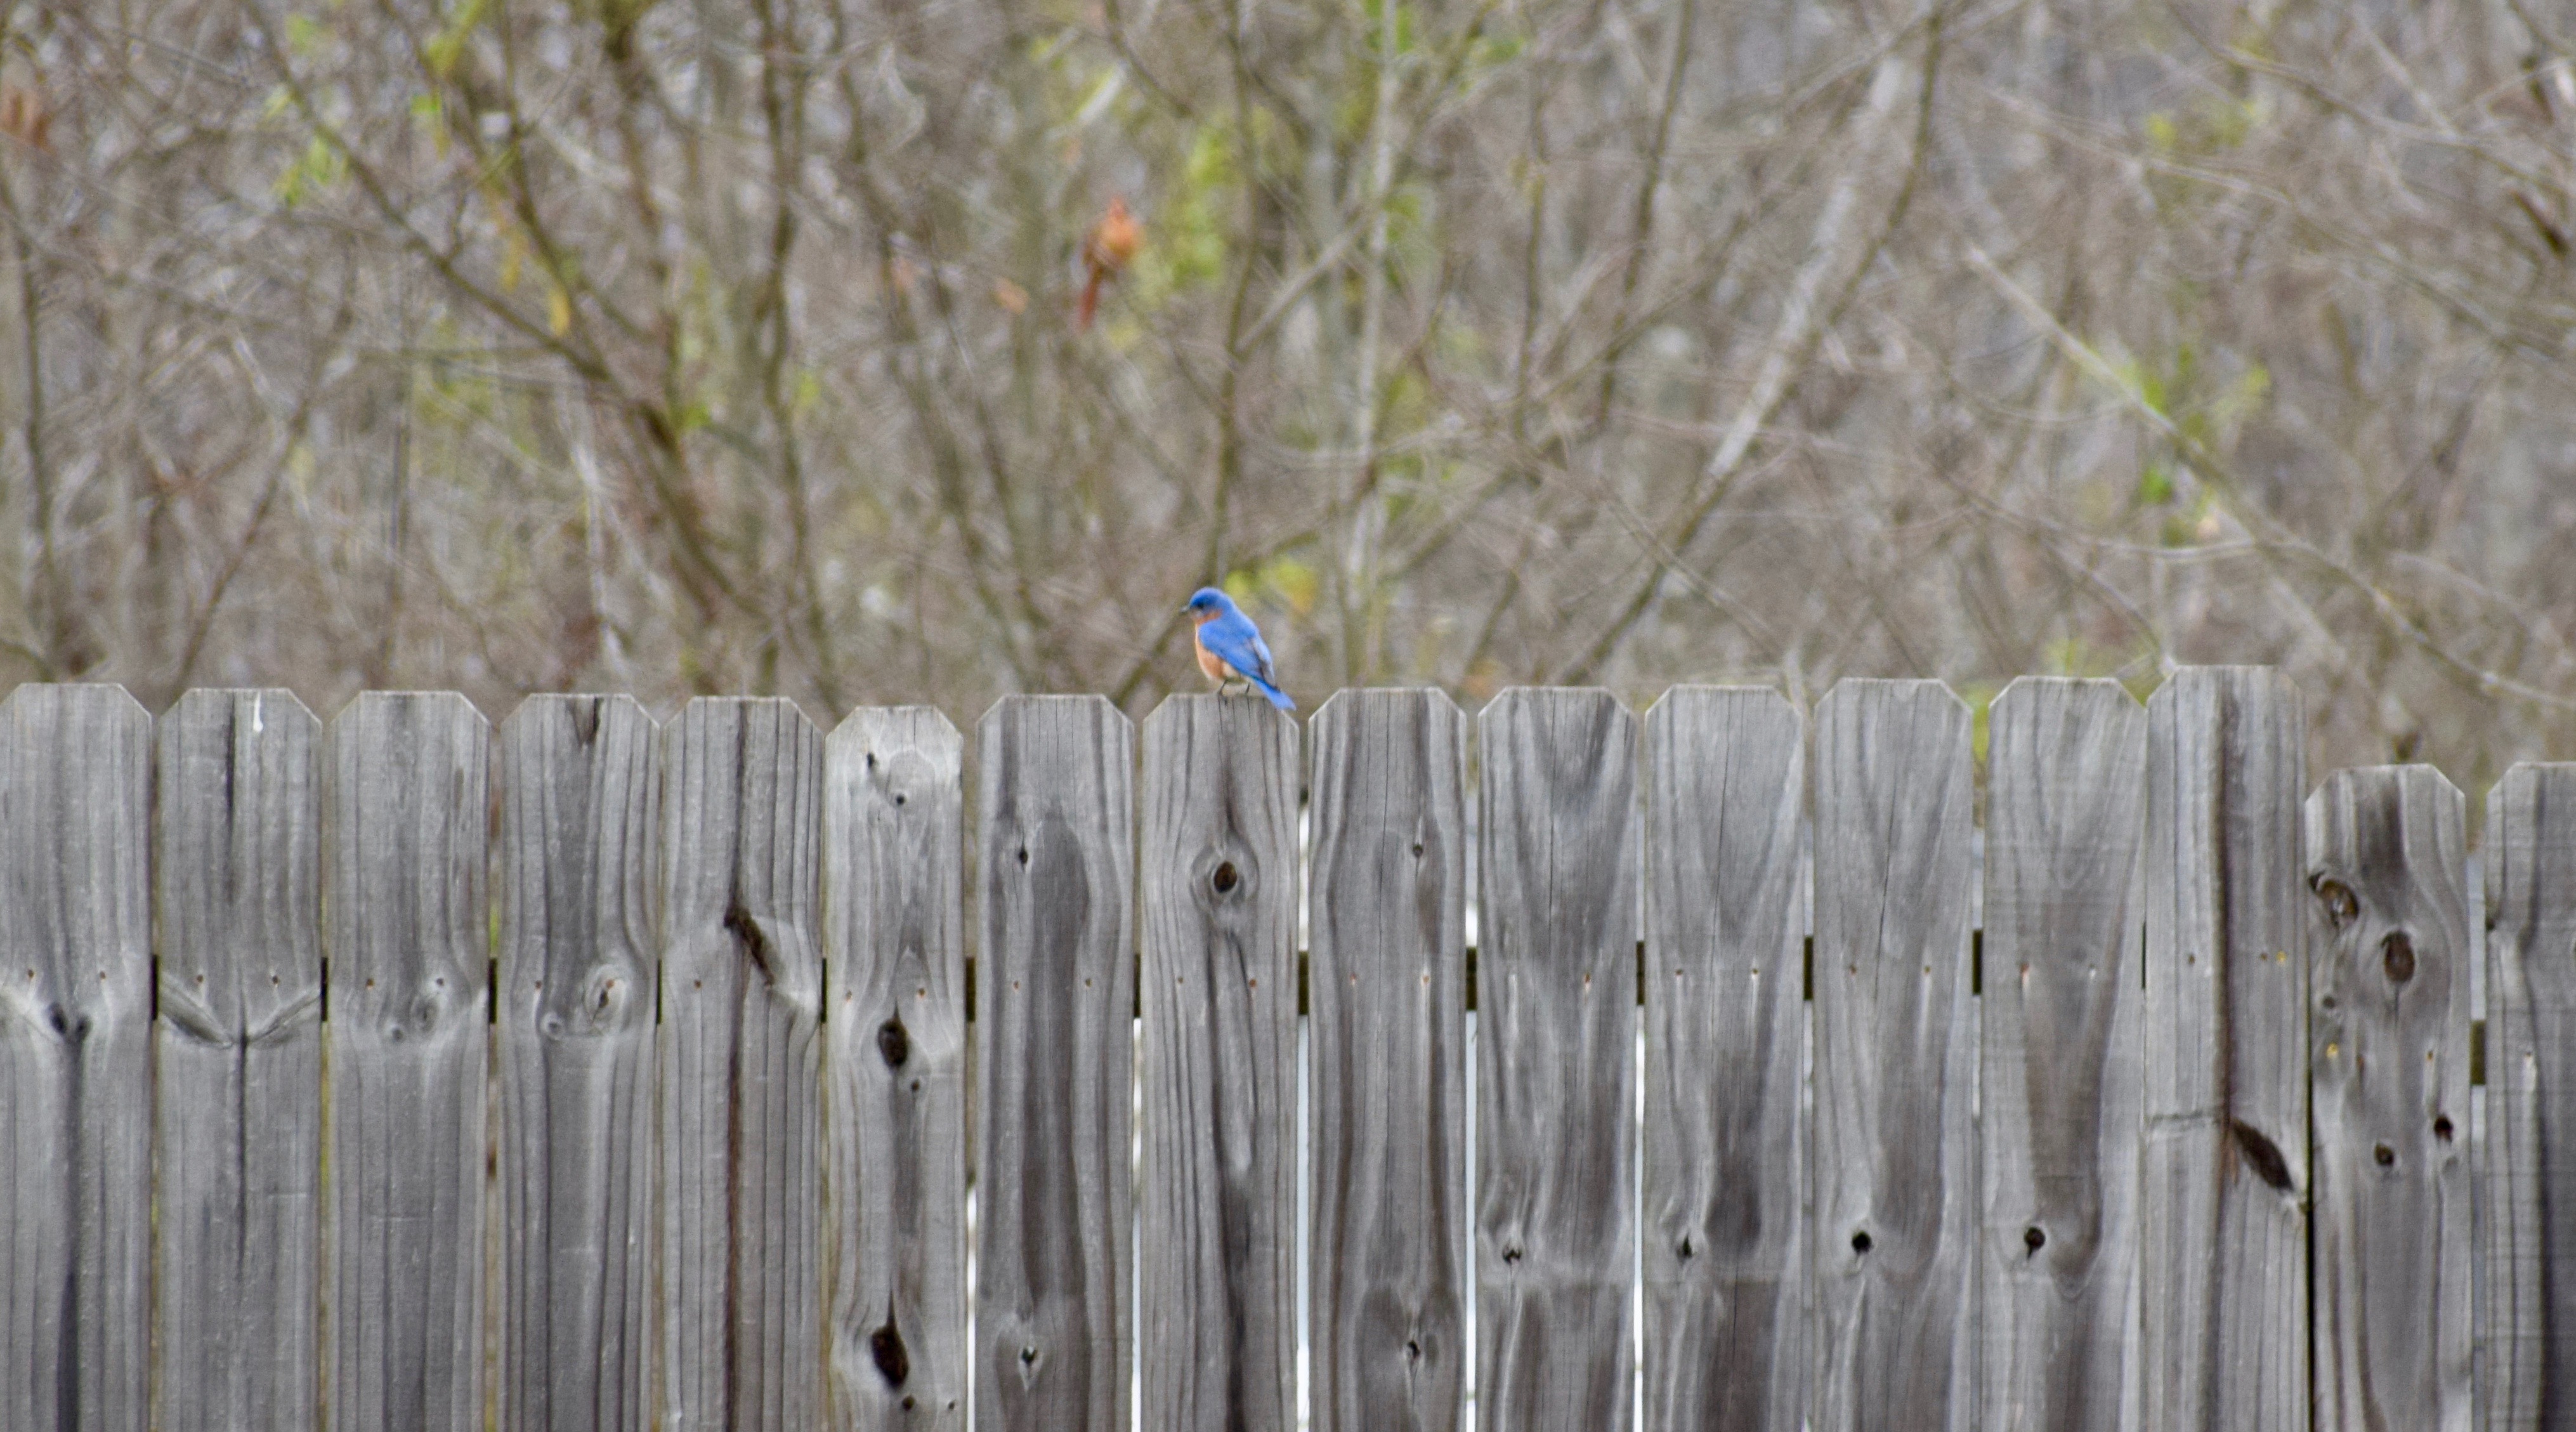 It's the weekend! Number 53!, Bluebird on a Fence